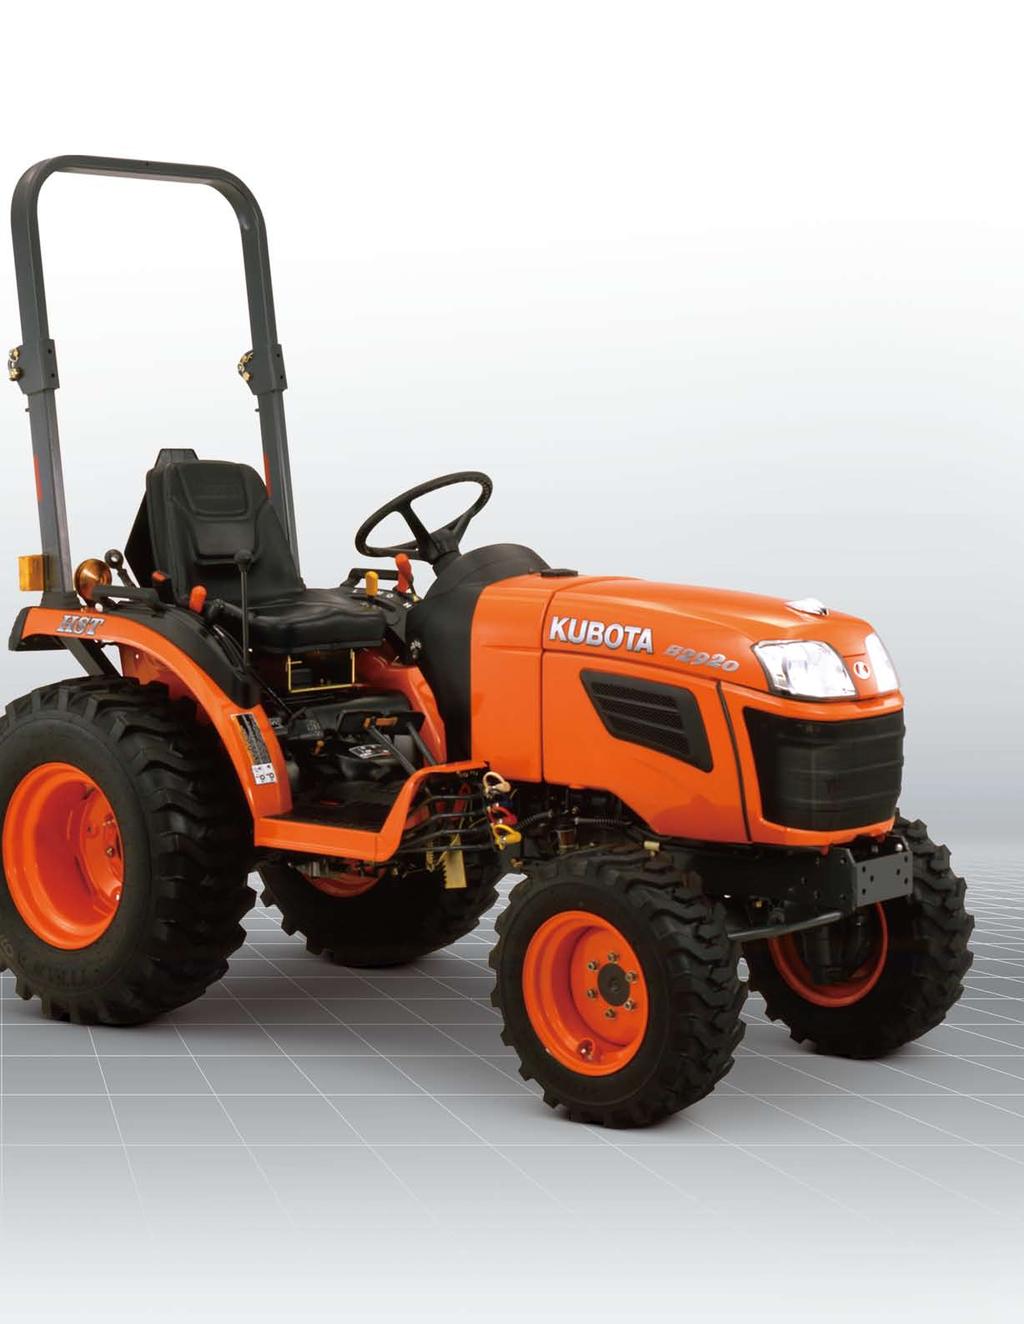 B2320/B2620/B2920 More Speeds With an increased maximum speed and three range shift speeds (Hi/Med/Lo), the B2320/B2620/B2920 let you find the right speed to suit your task, for outstanding